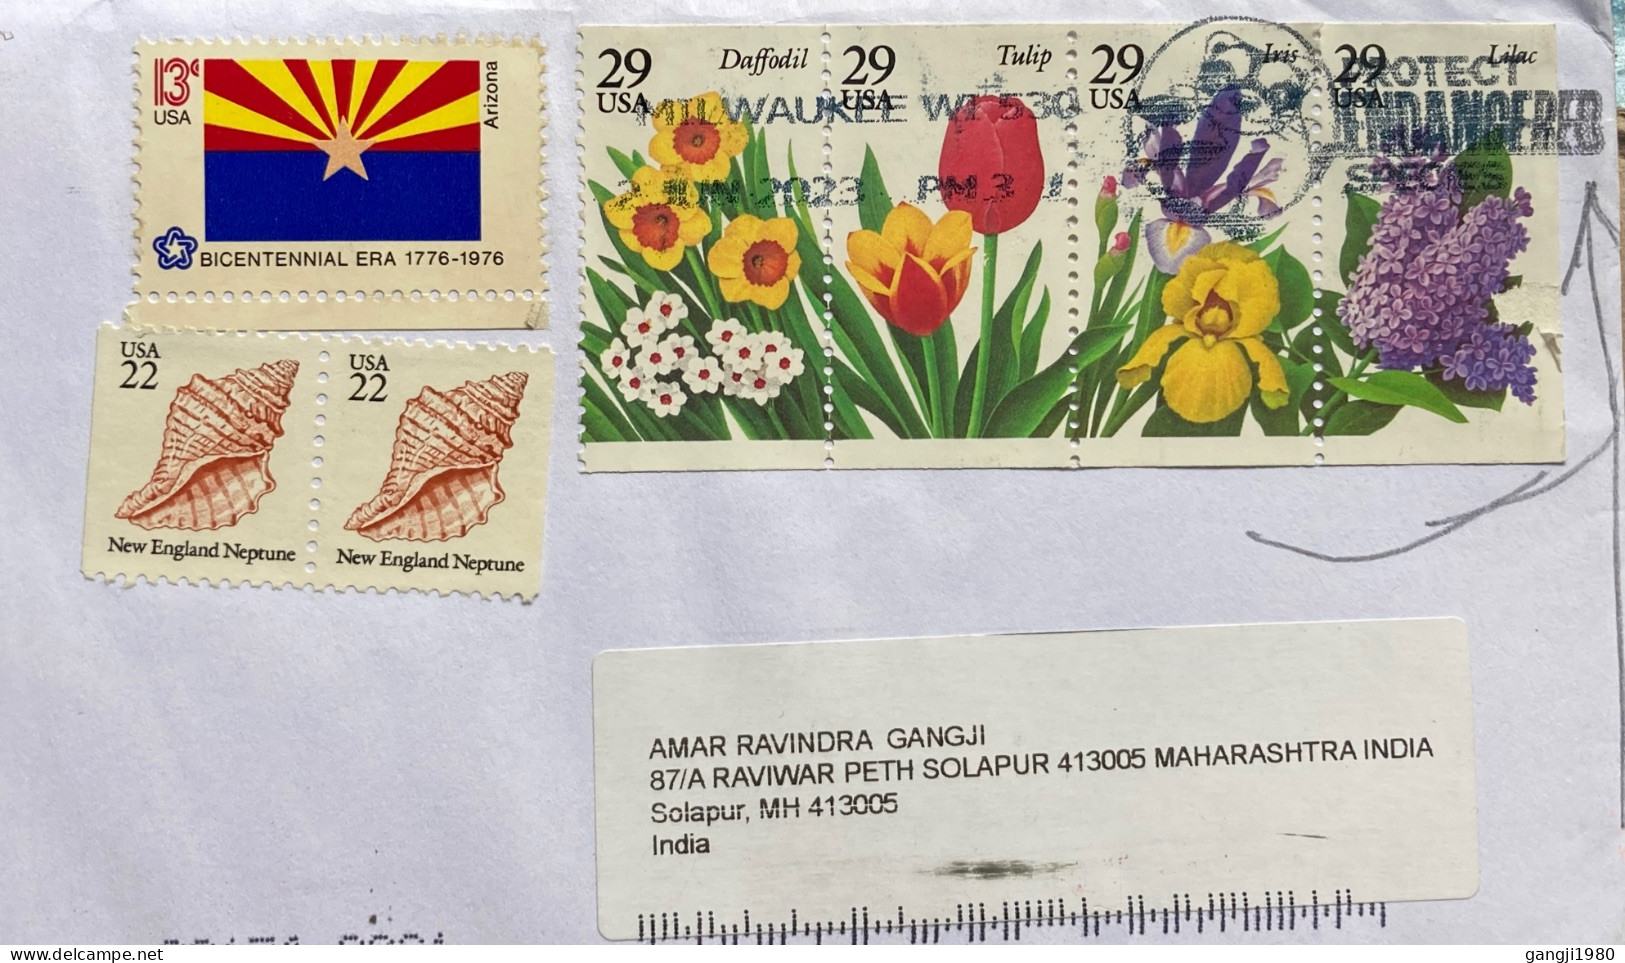 USA-2023, COVER USED TO INDIA, FLOWER SE-TENENT, ARIZONA FLAG, COUNCH & SHELL, PANDA ANIMAL, WWF, PROTECT ENDANGER SPECI - Covers & Documents